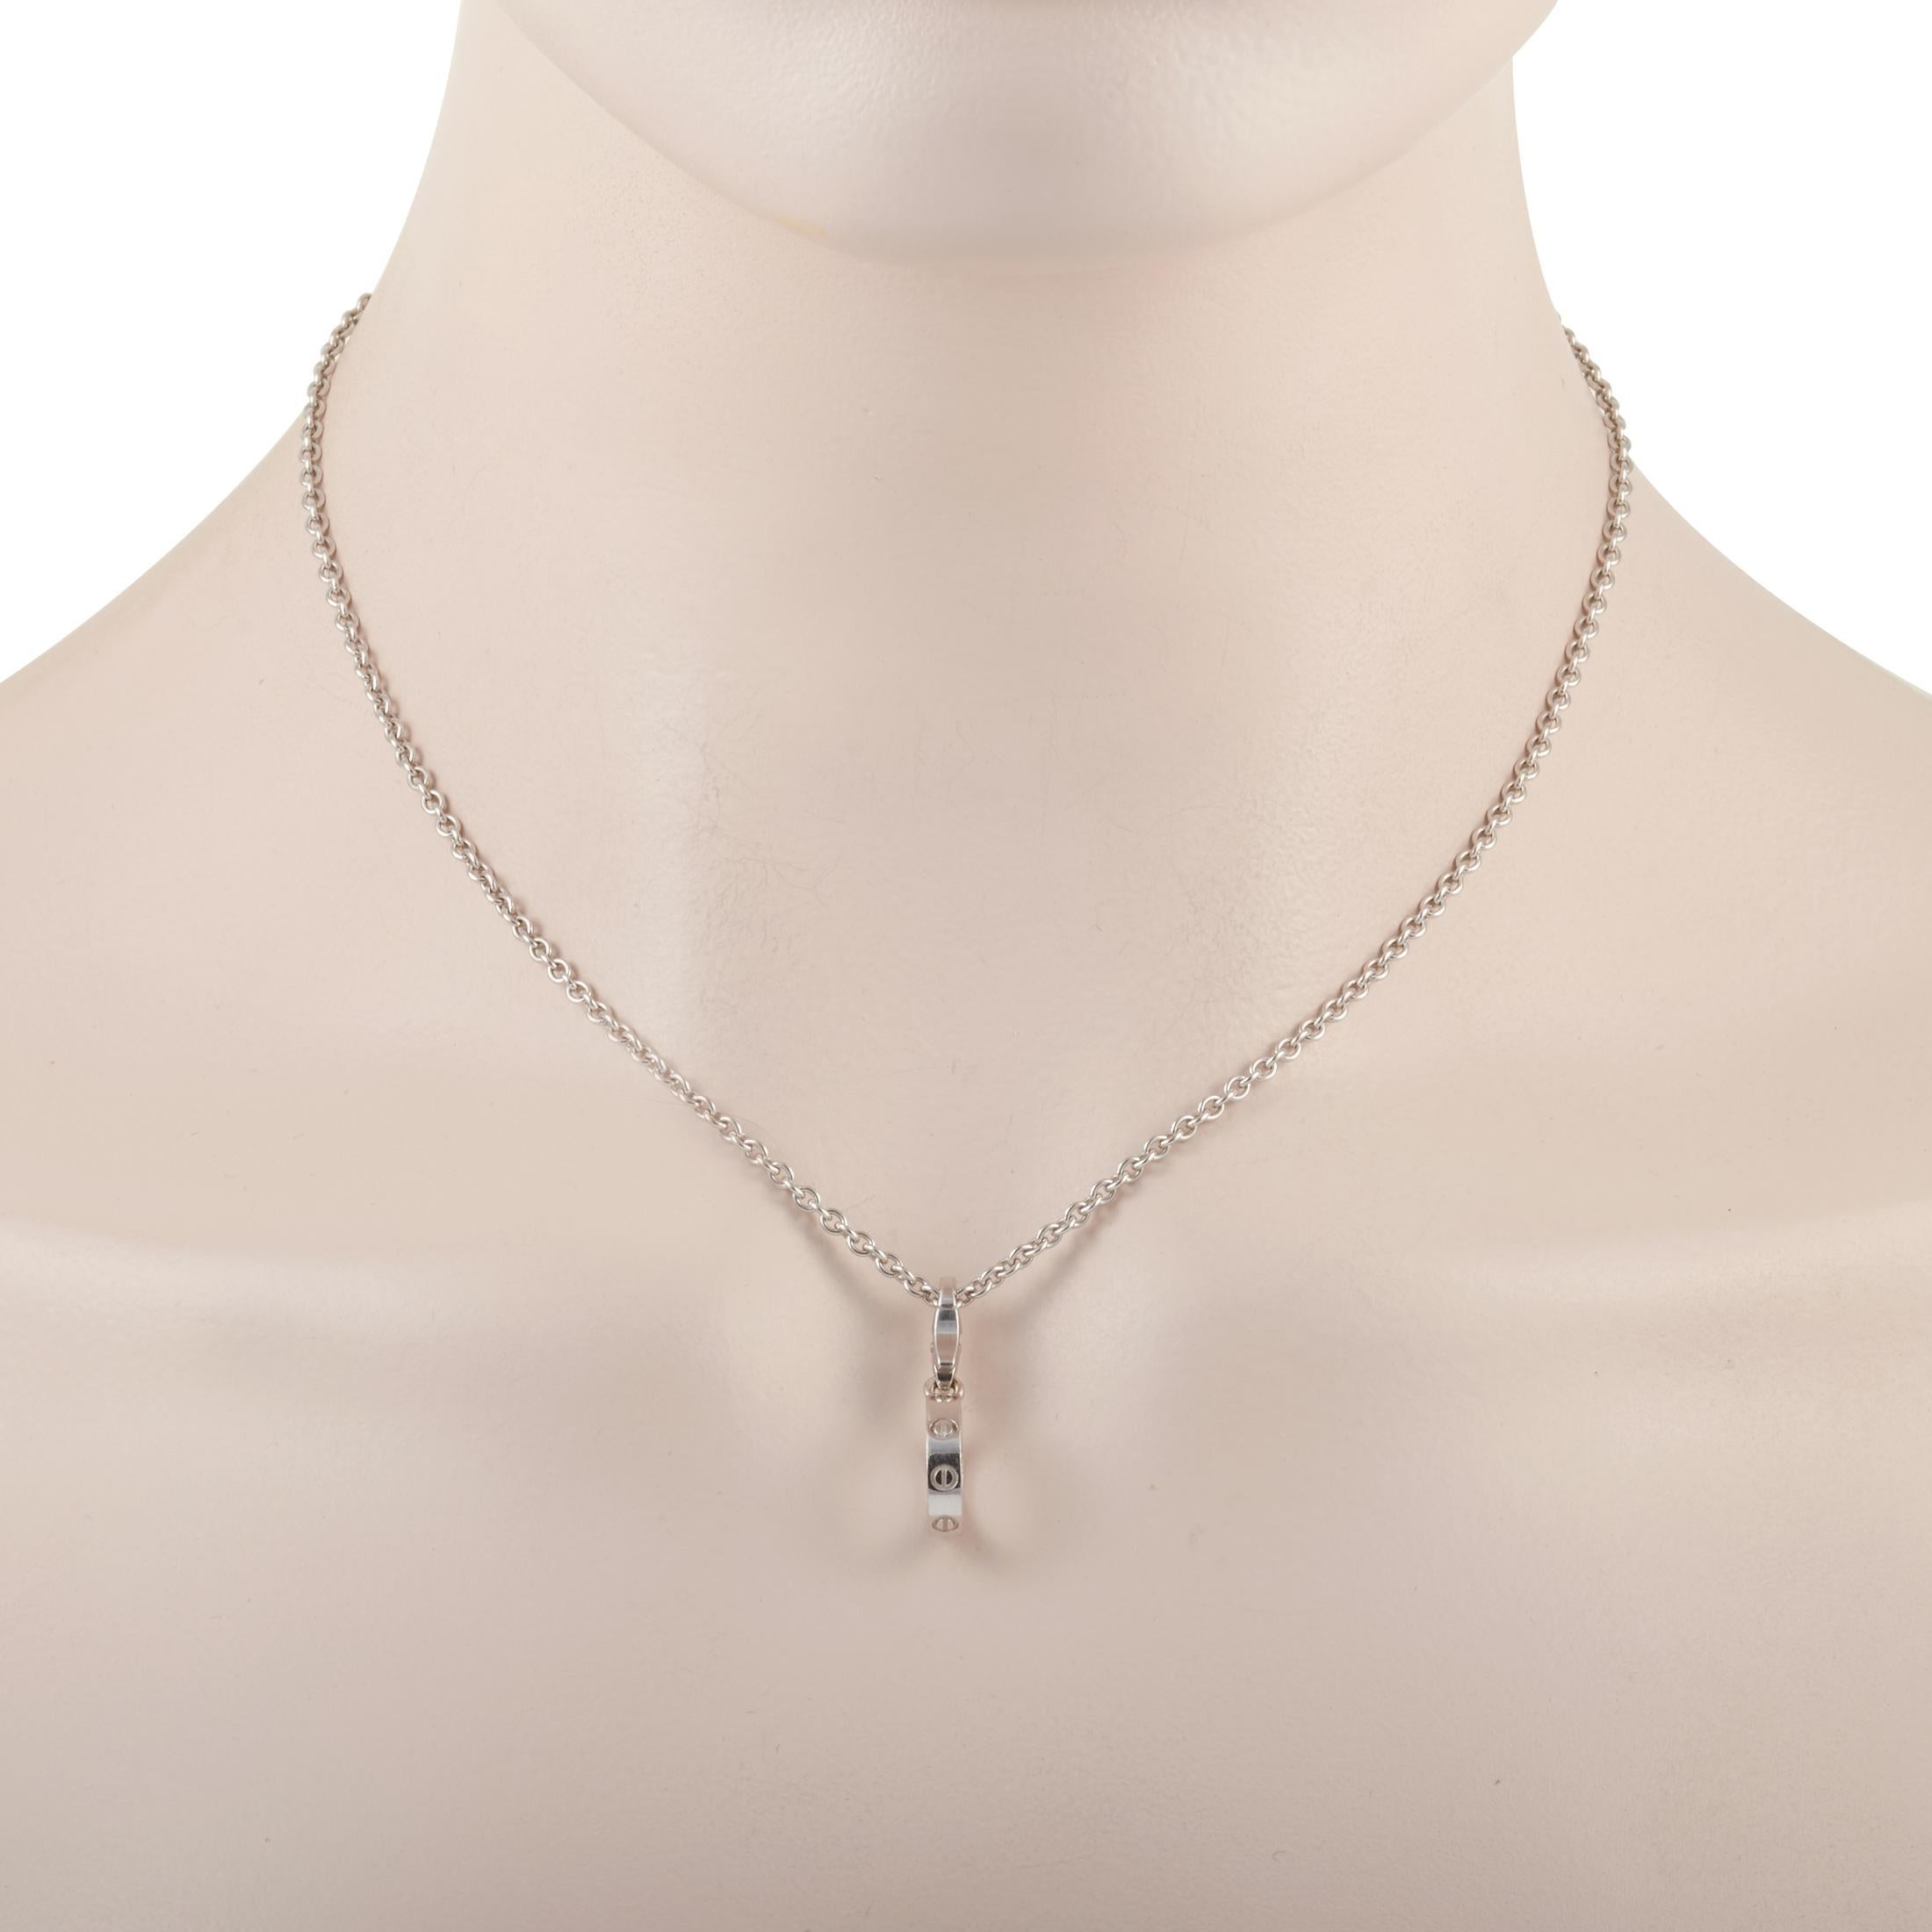 This Cartier chain is made from 18K white gold. It belongs to the LOVE collection necklace, and it’s a perfect valentine’s, birthday, and wedding anniversary gift for your soulmate. The necklace features a simple but unique pendant. It weighs 10.7